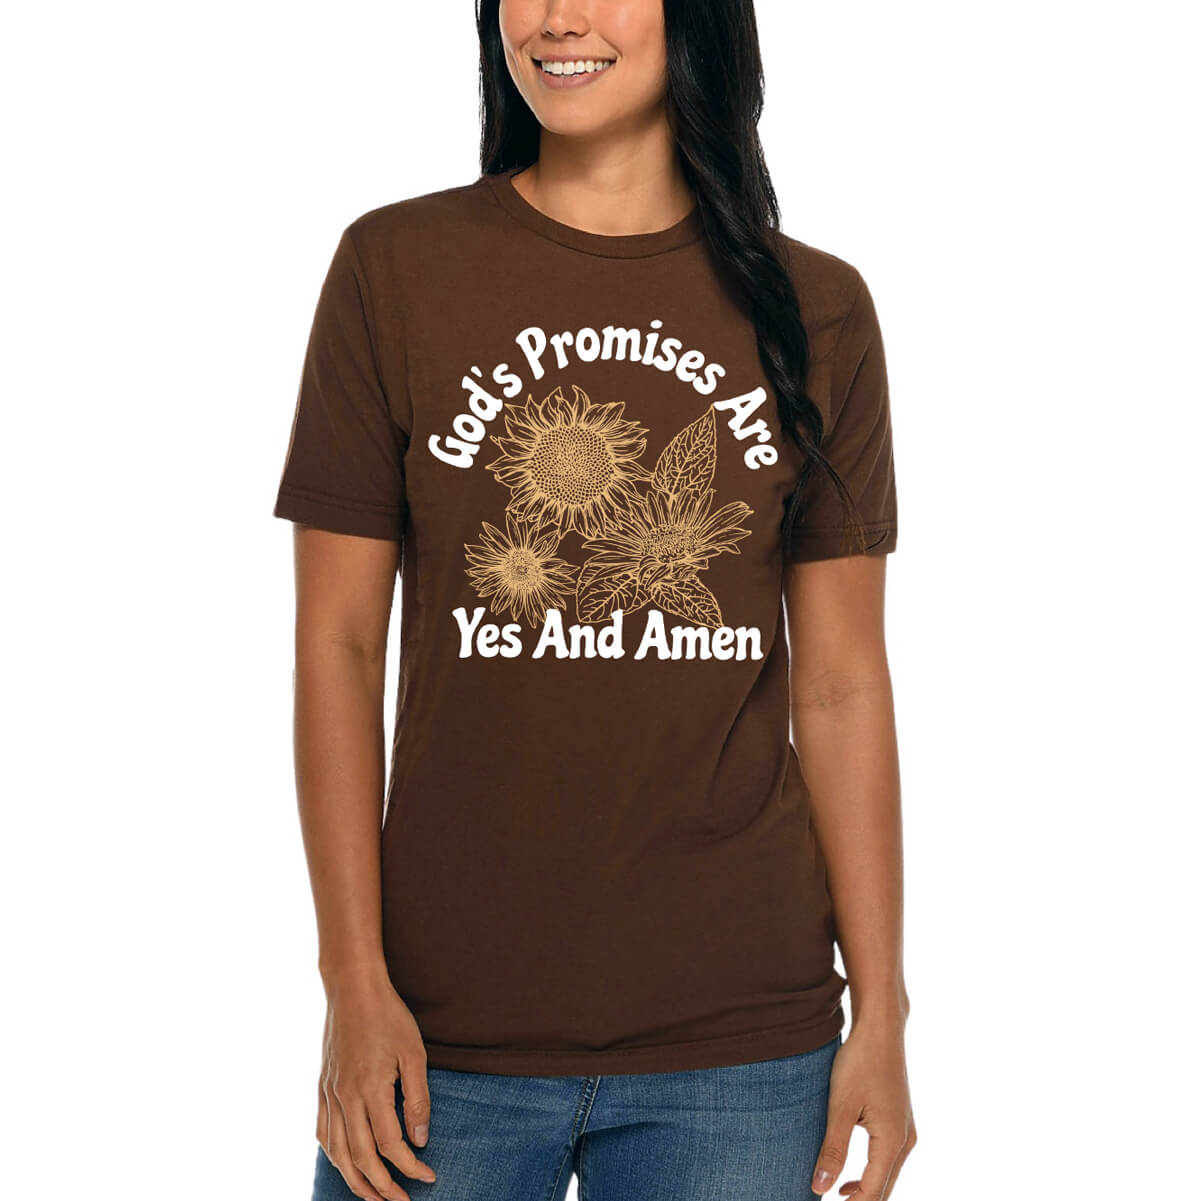 God's Promises Are Yes And Amen T-Shirt